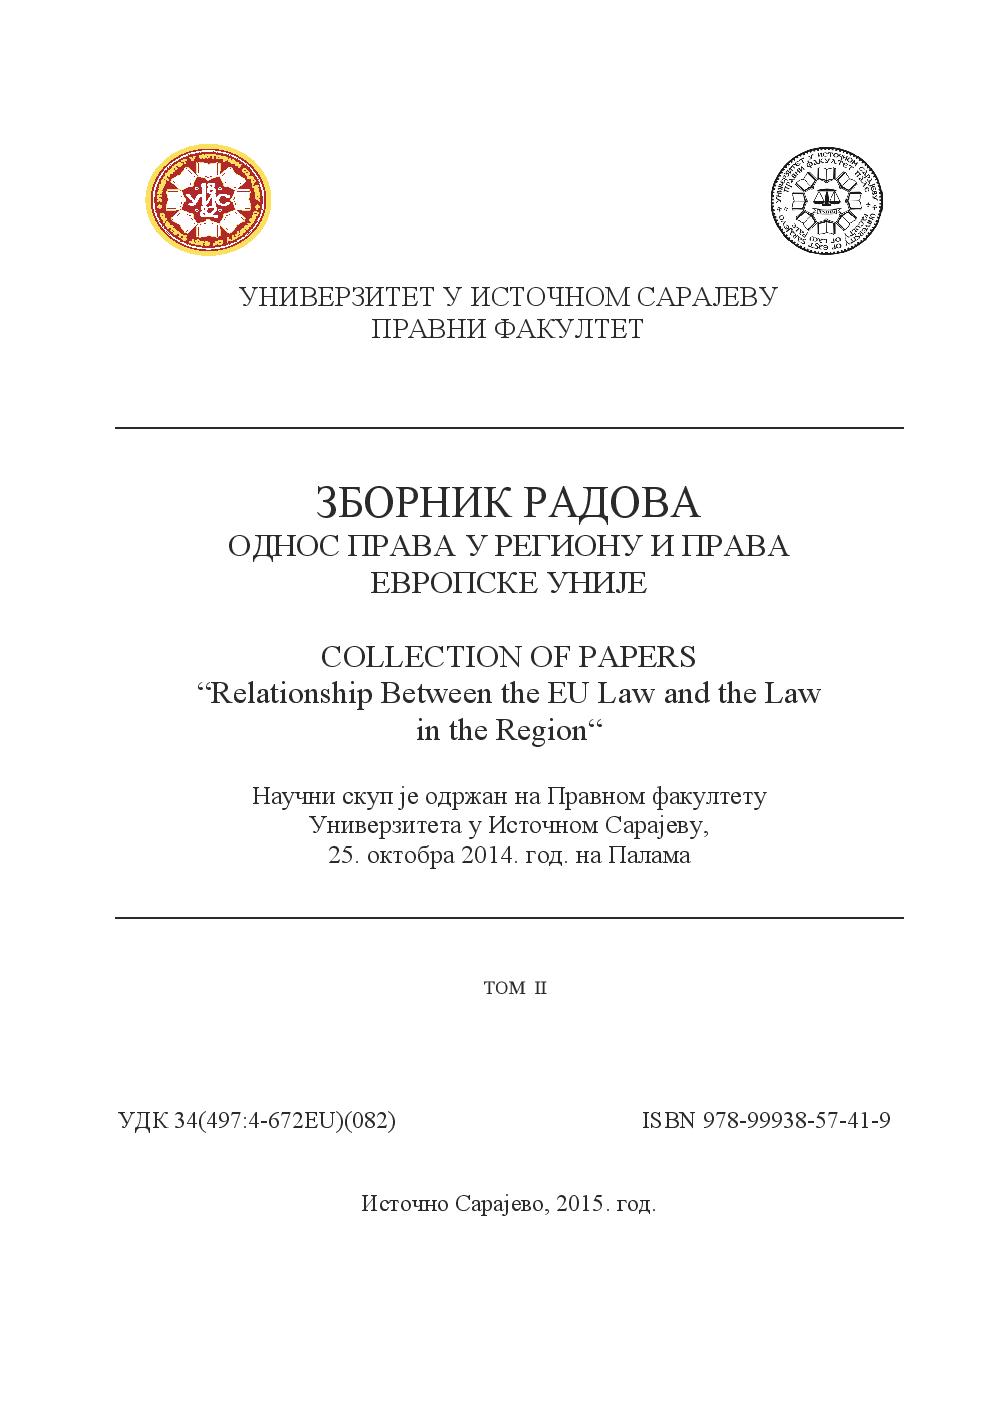 Collection of Papers"Relationship Between the EU and the Law in the Region"Vol II